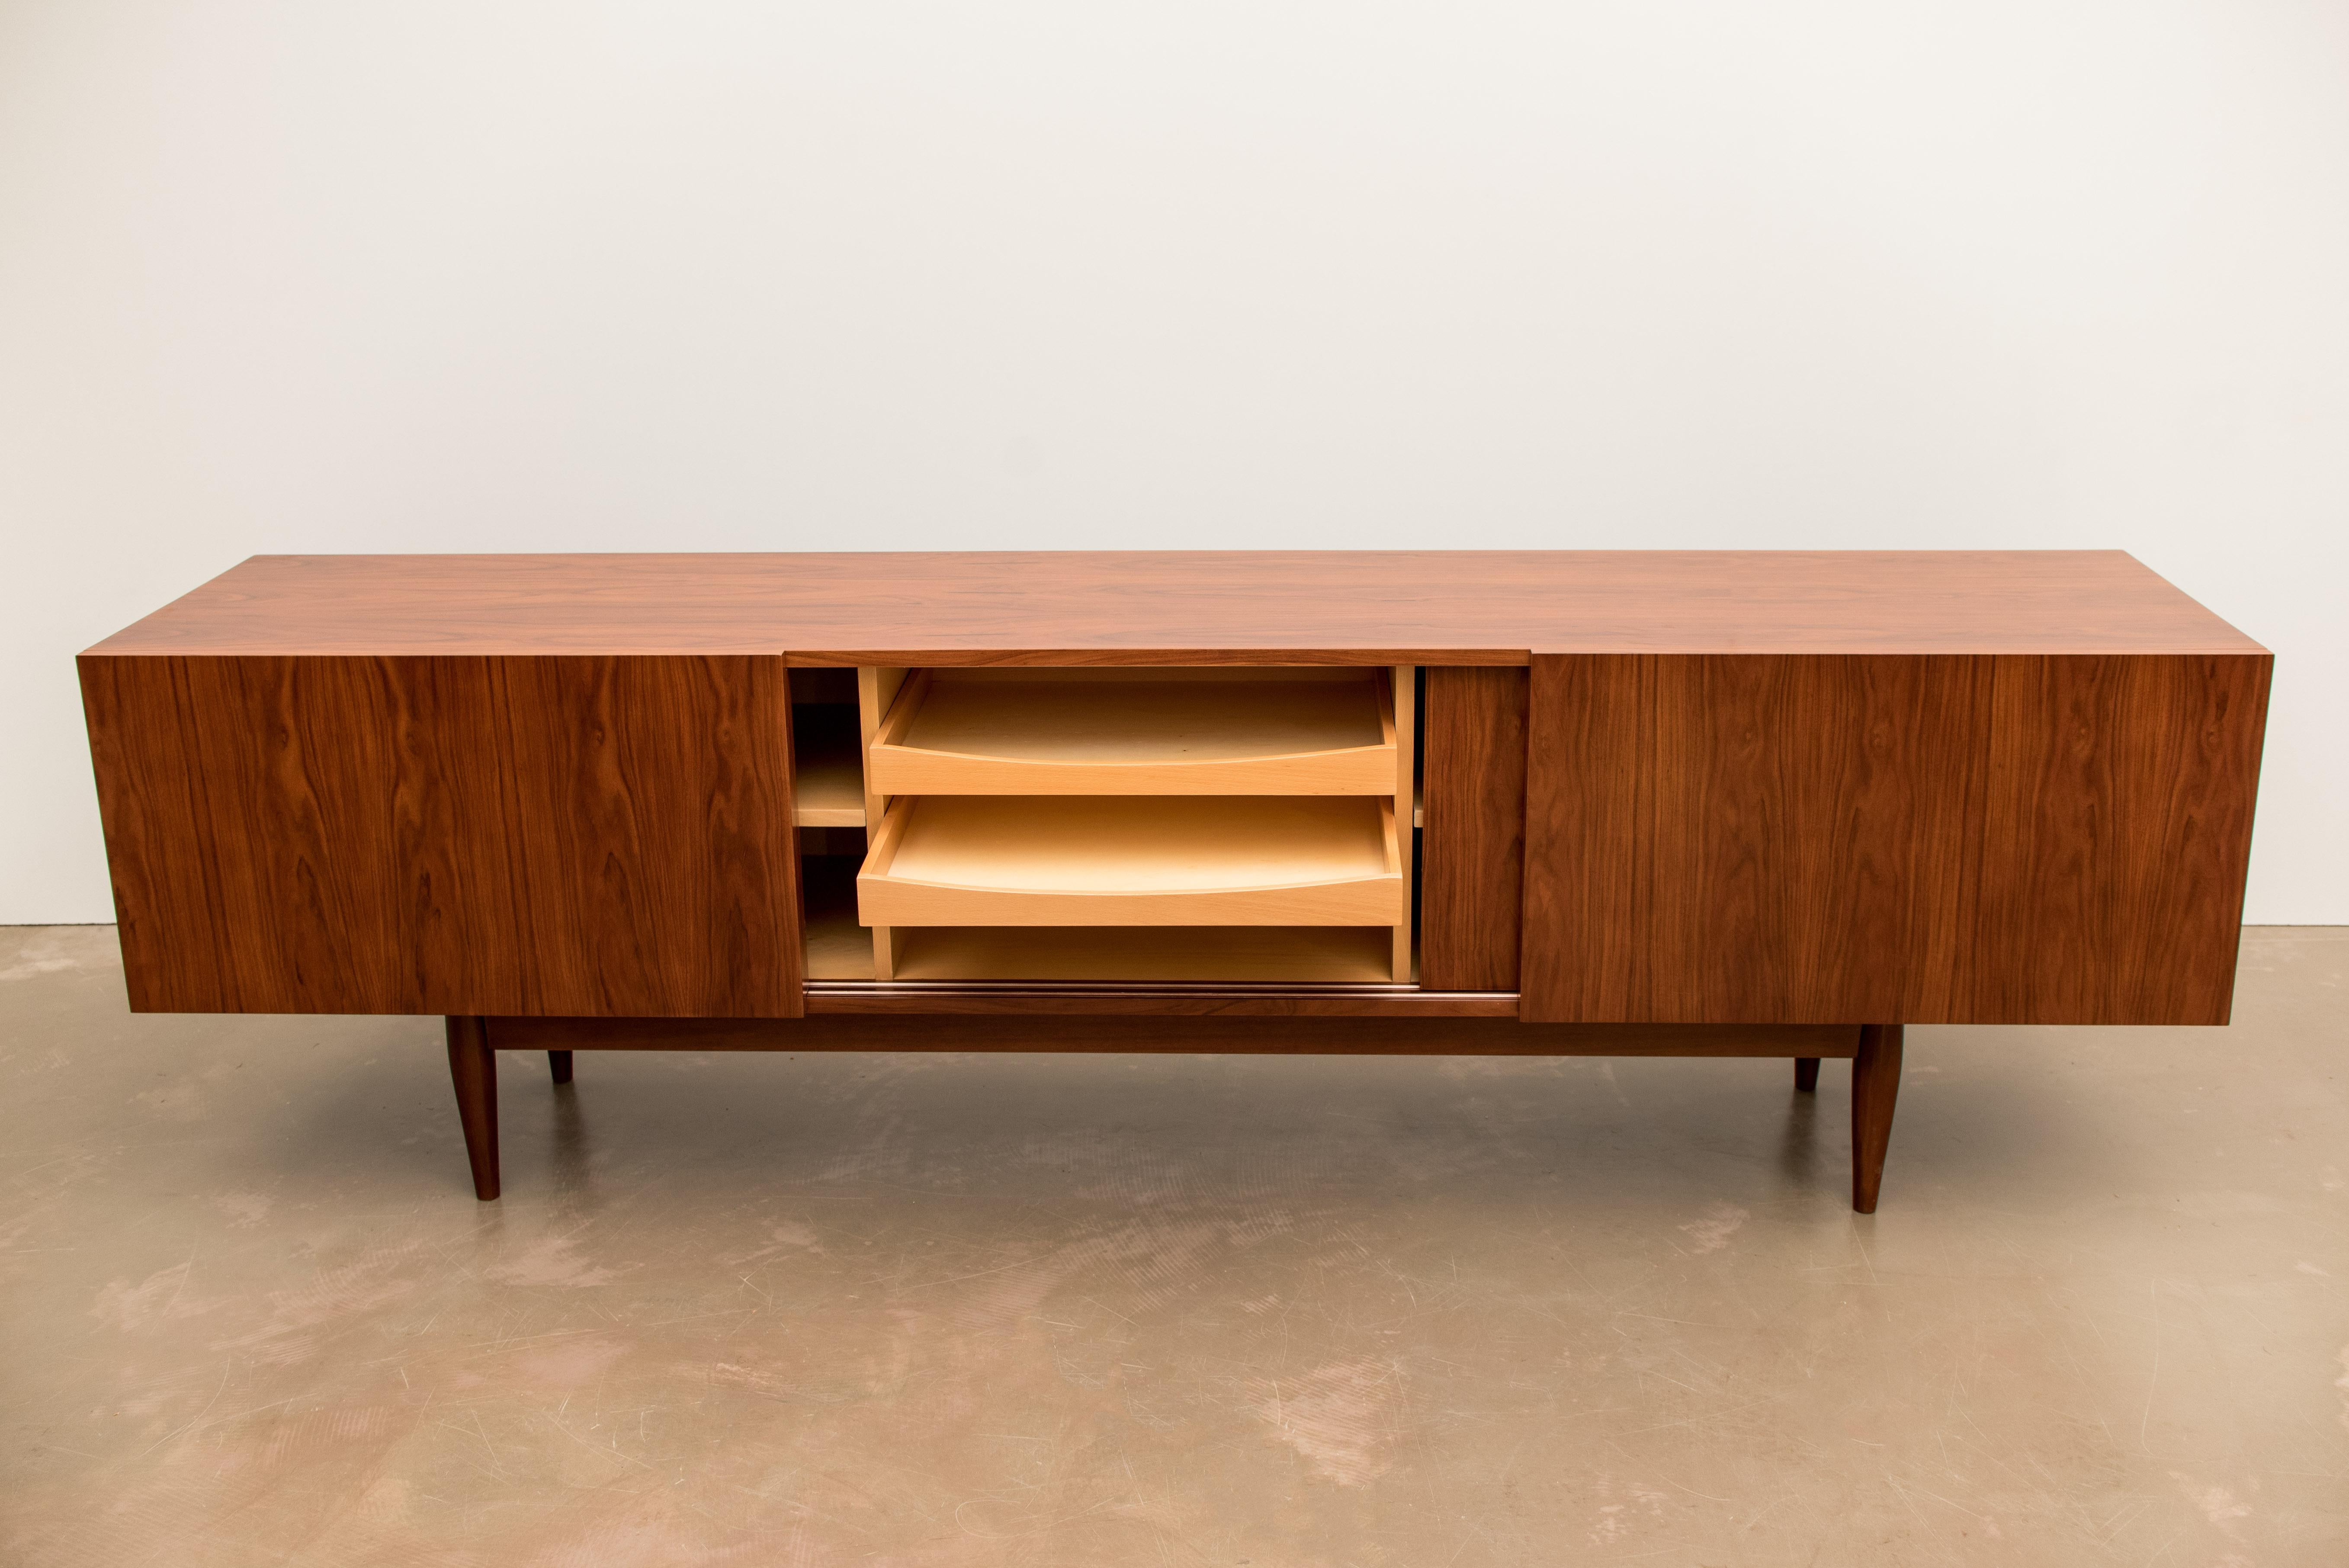 This wide sideboard is made of rosewood and features sliding doors opening to internal compartments and drawers.